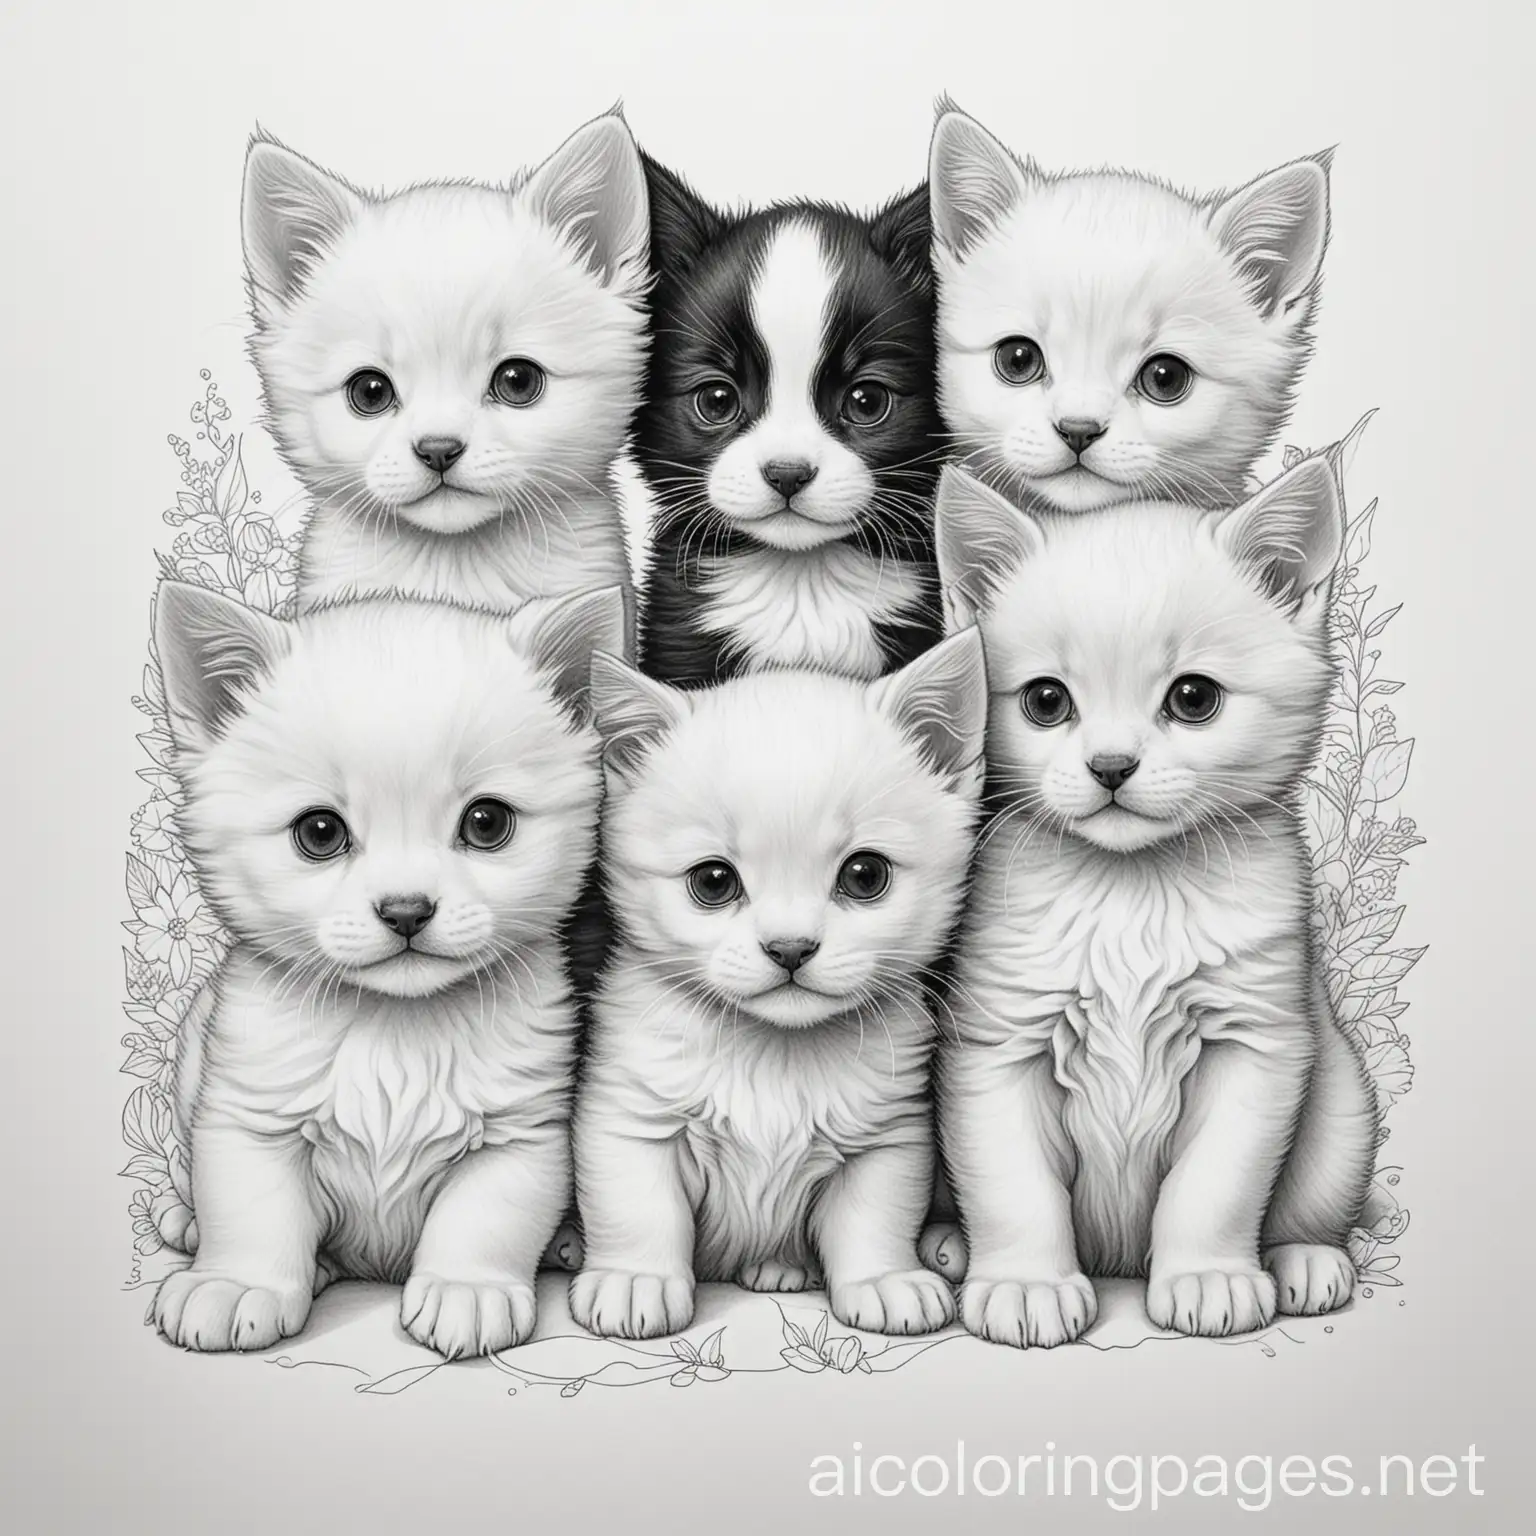 Adorable-Puppies-and-Kittens-Coloring-Page-Black-and-White-Line-Art-on-White-Background